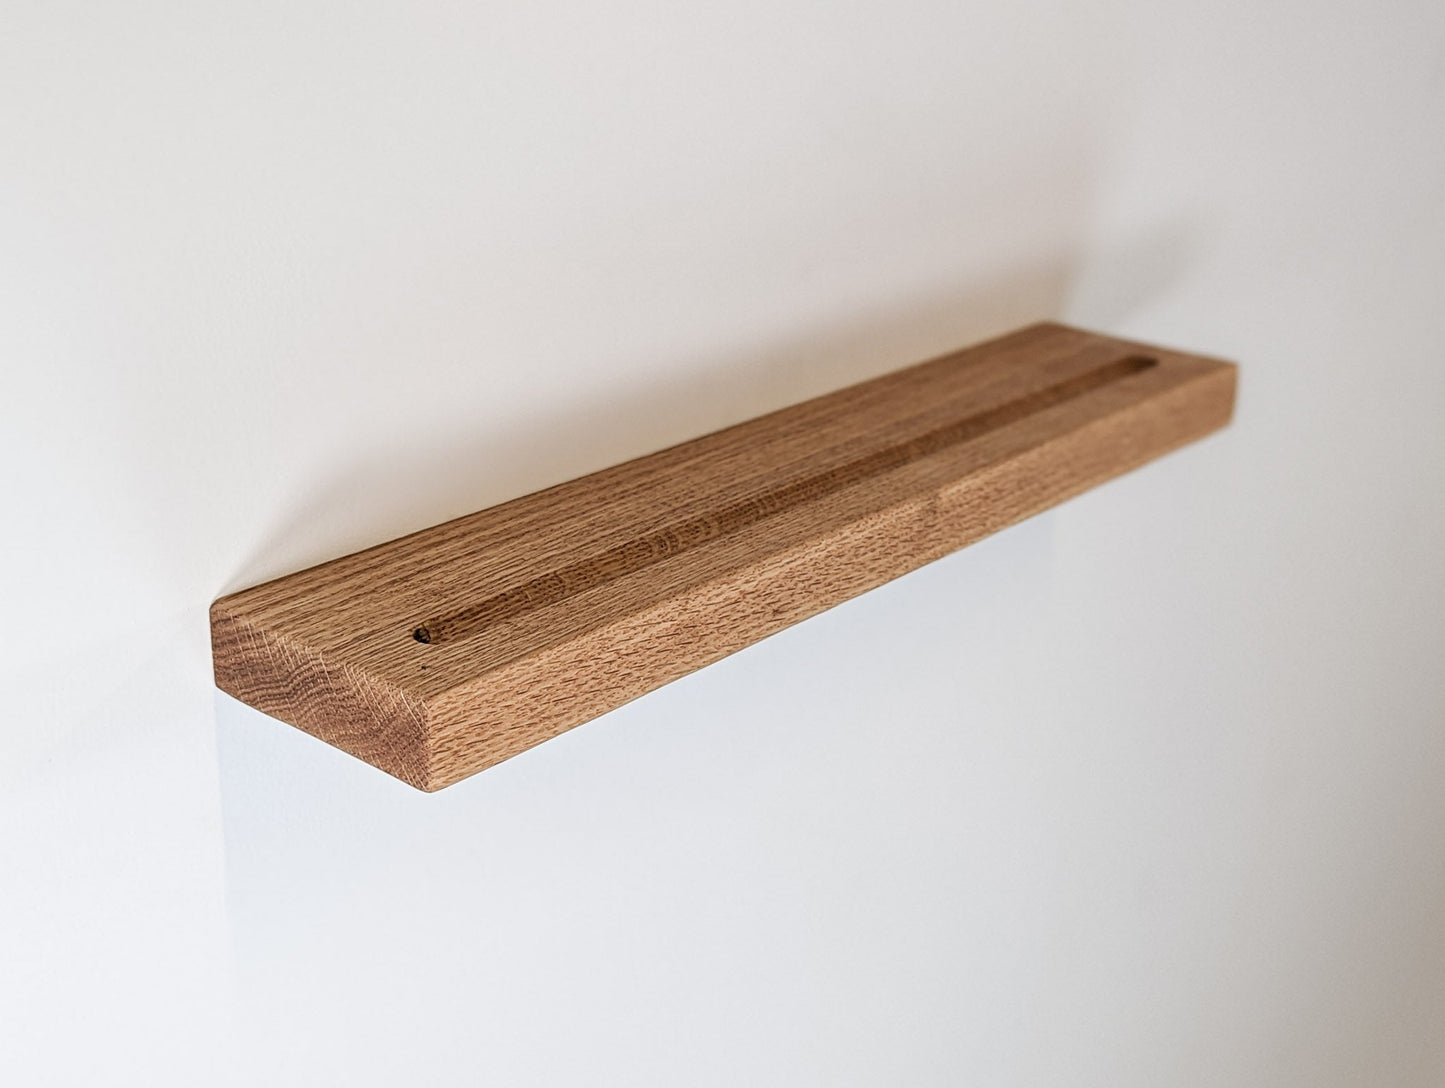 An oak floating shelf with rounded edges and a groove is attached to drywall.